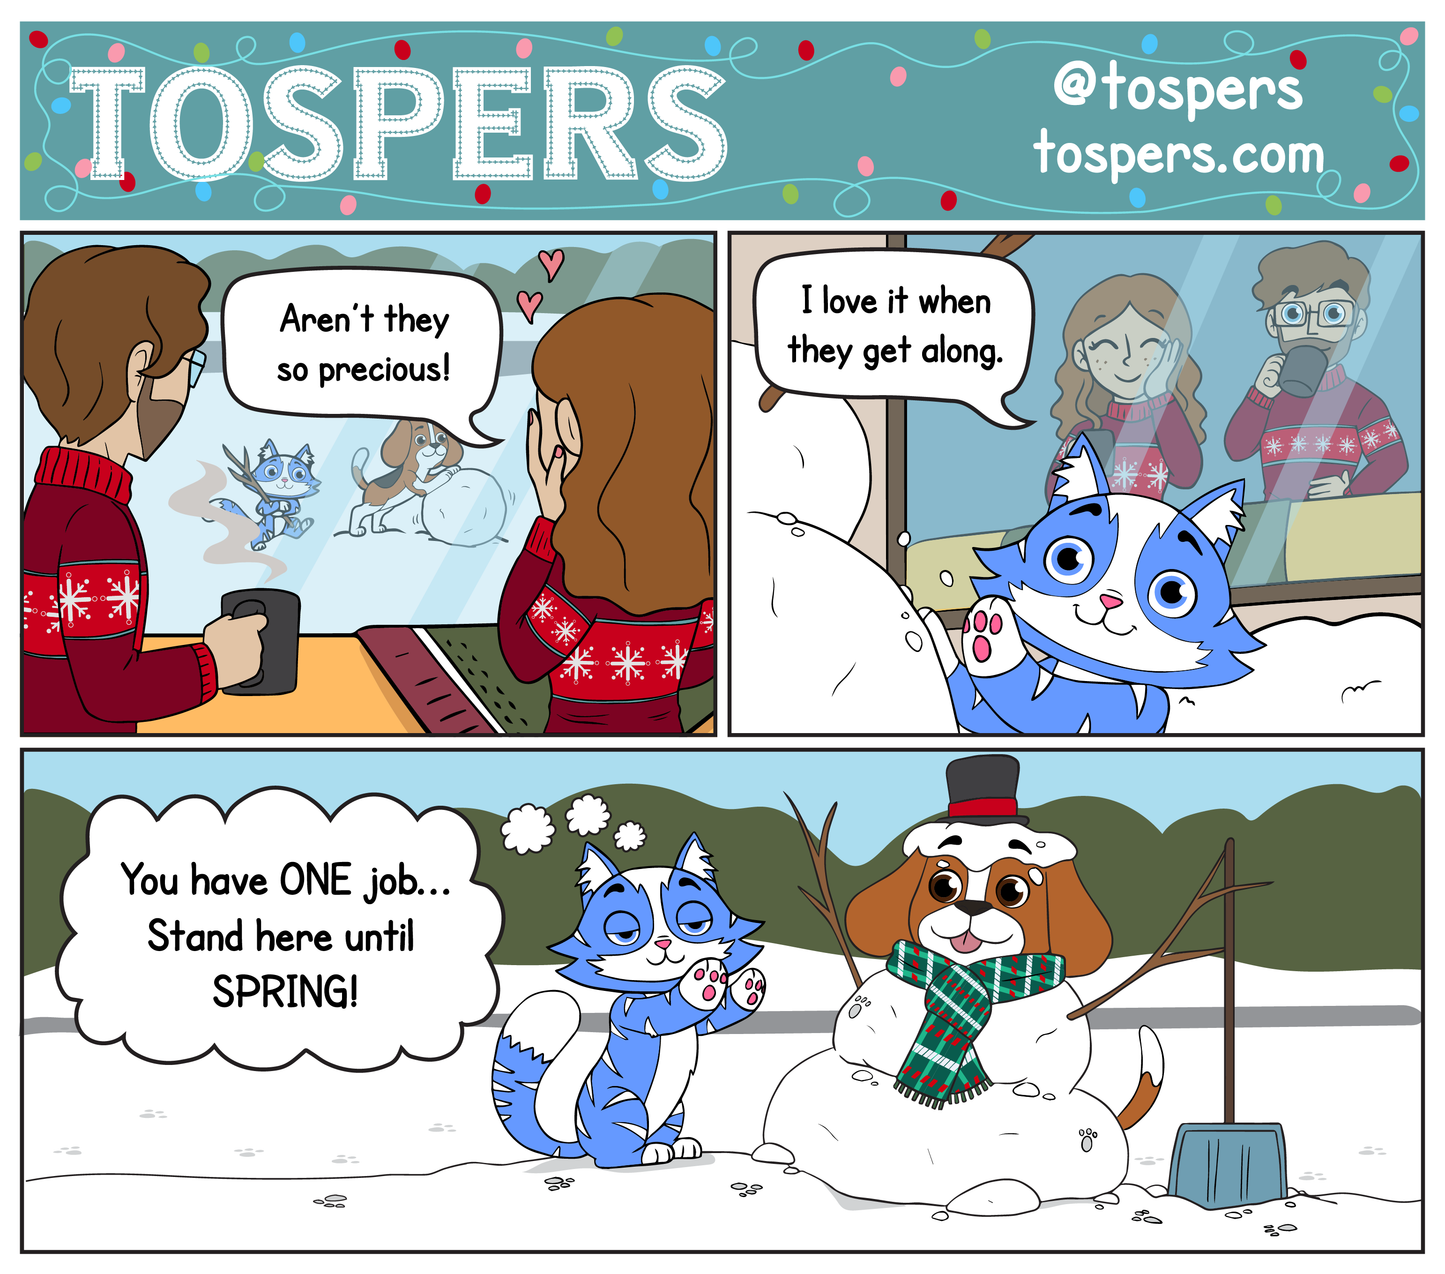 Tospers Goes to Church